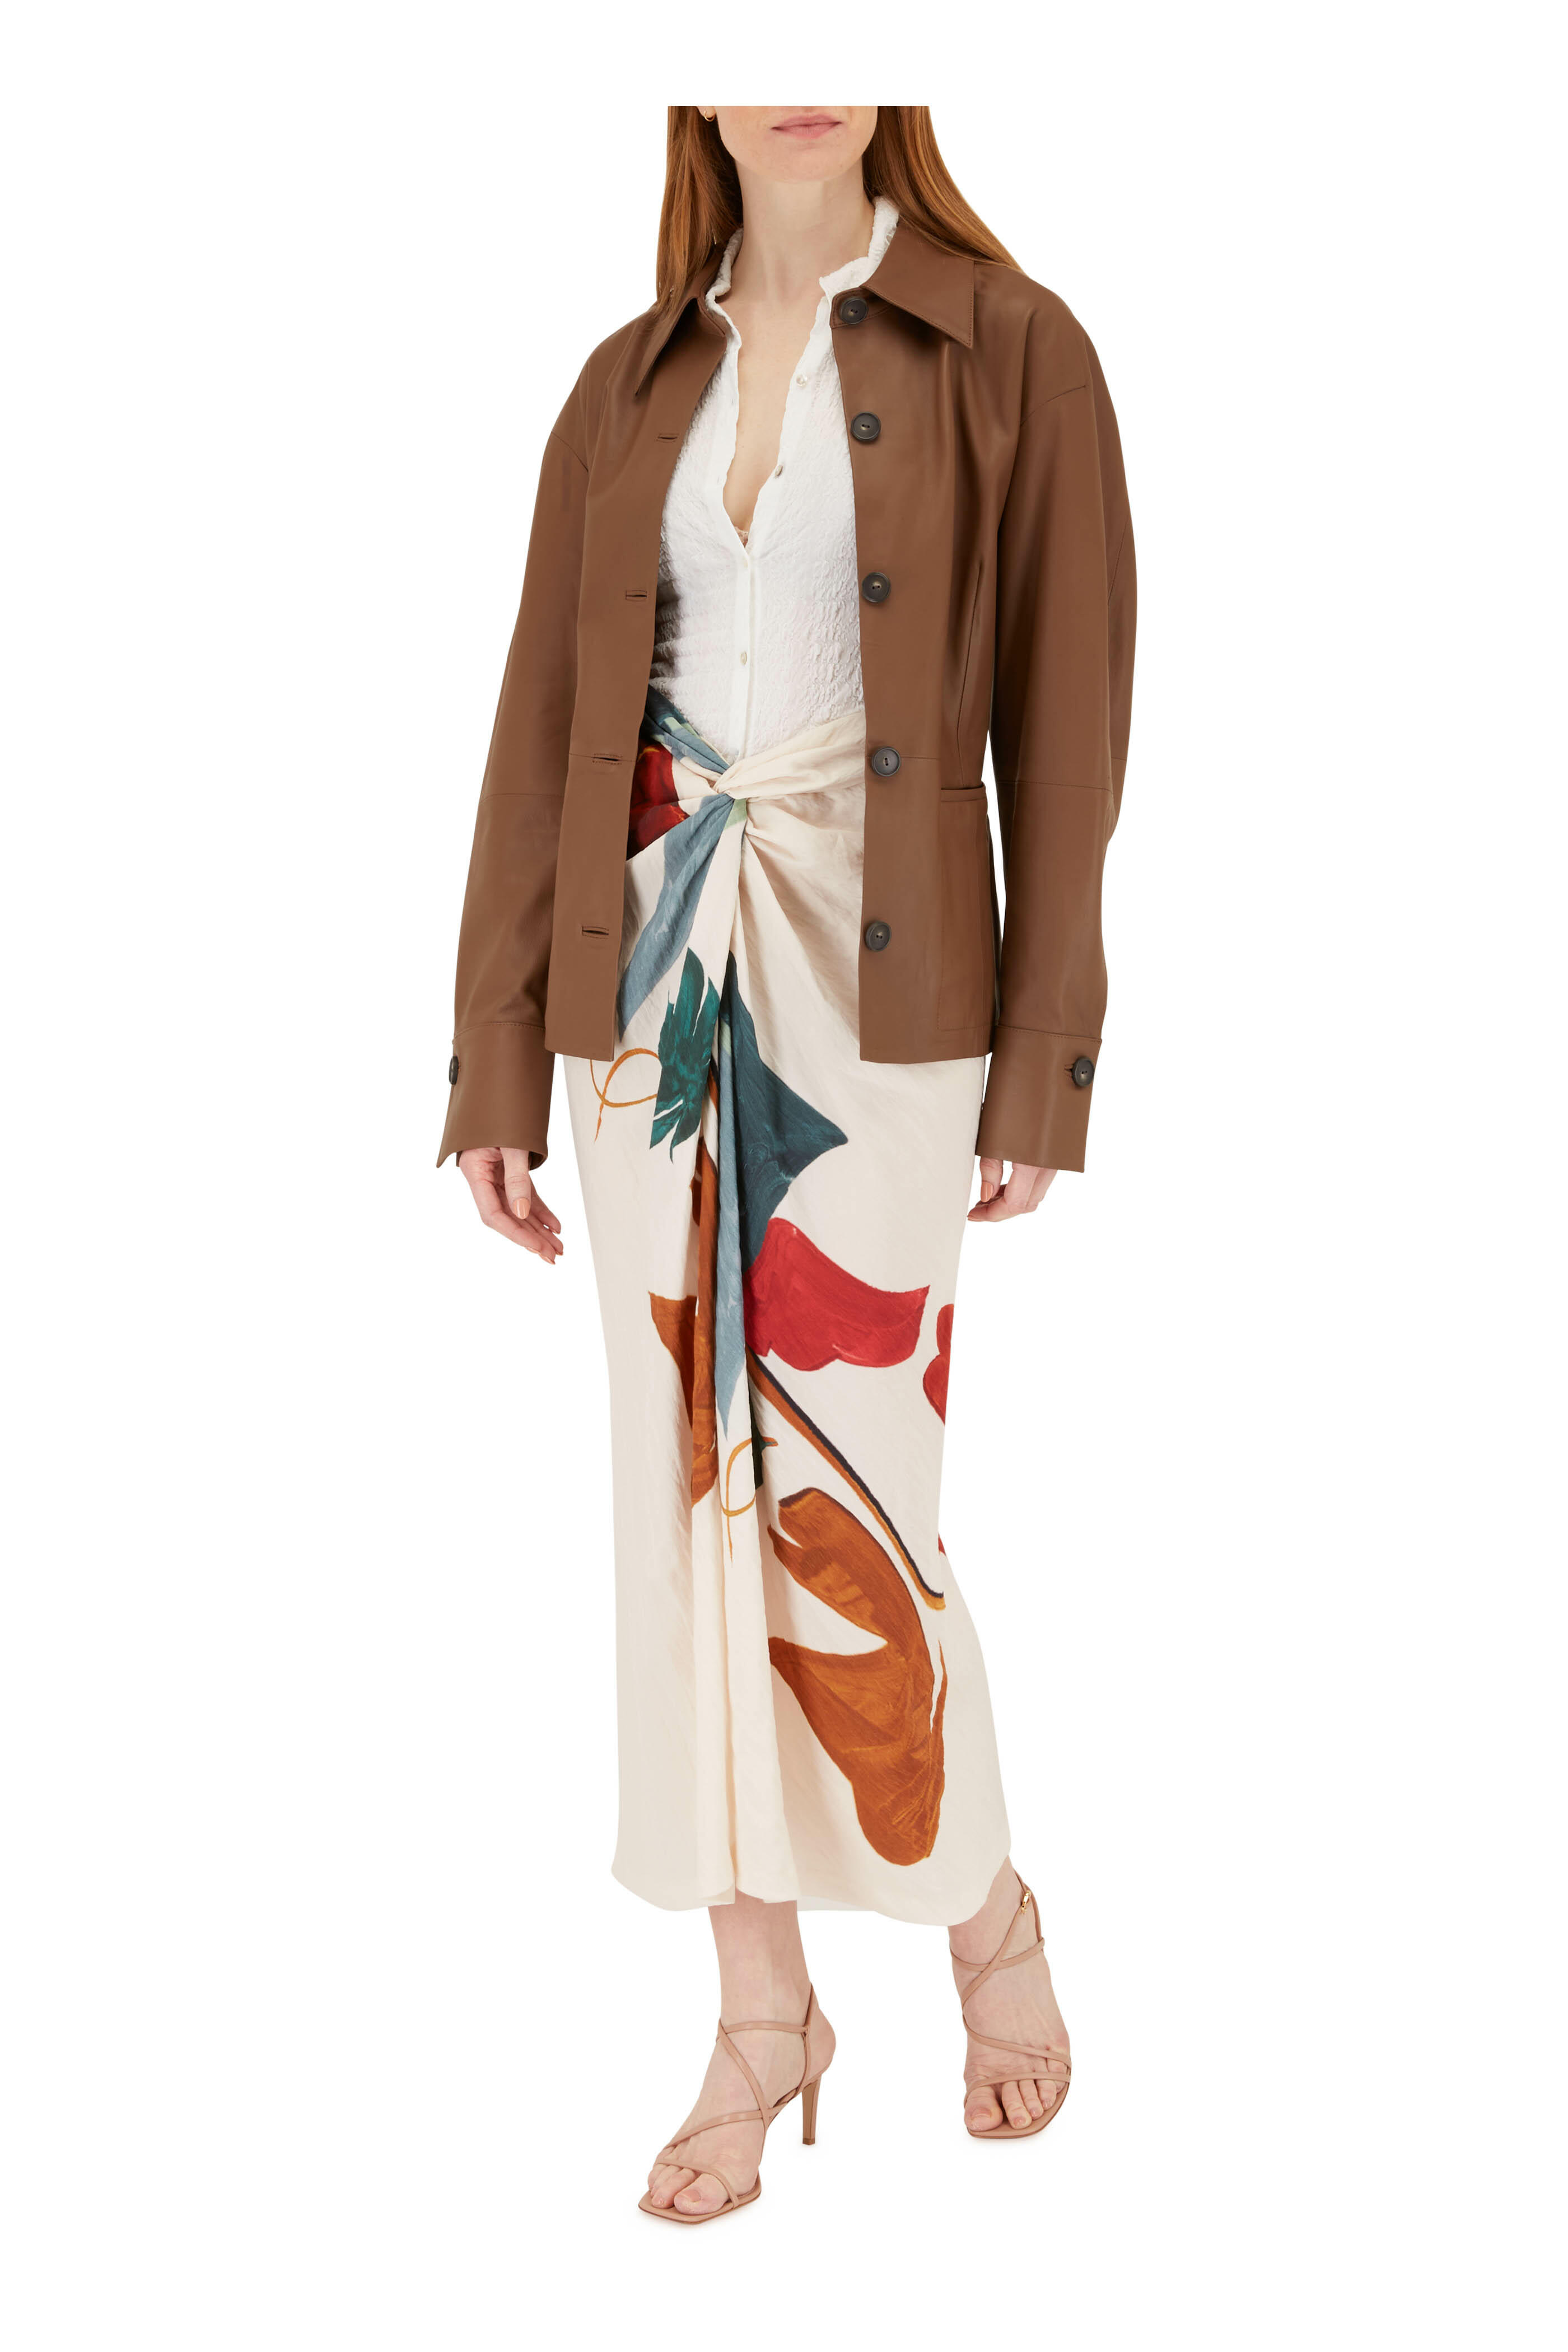 Vince - Milk Painted Abstract Draped Knot Skirt